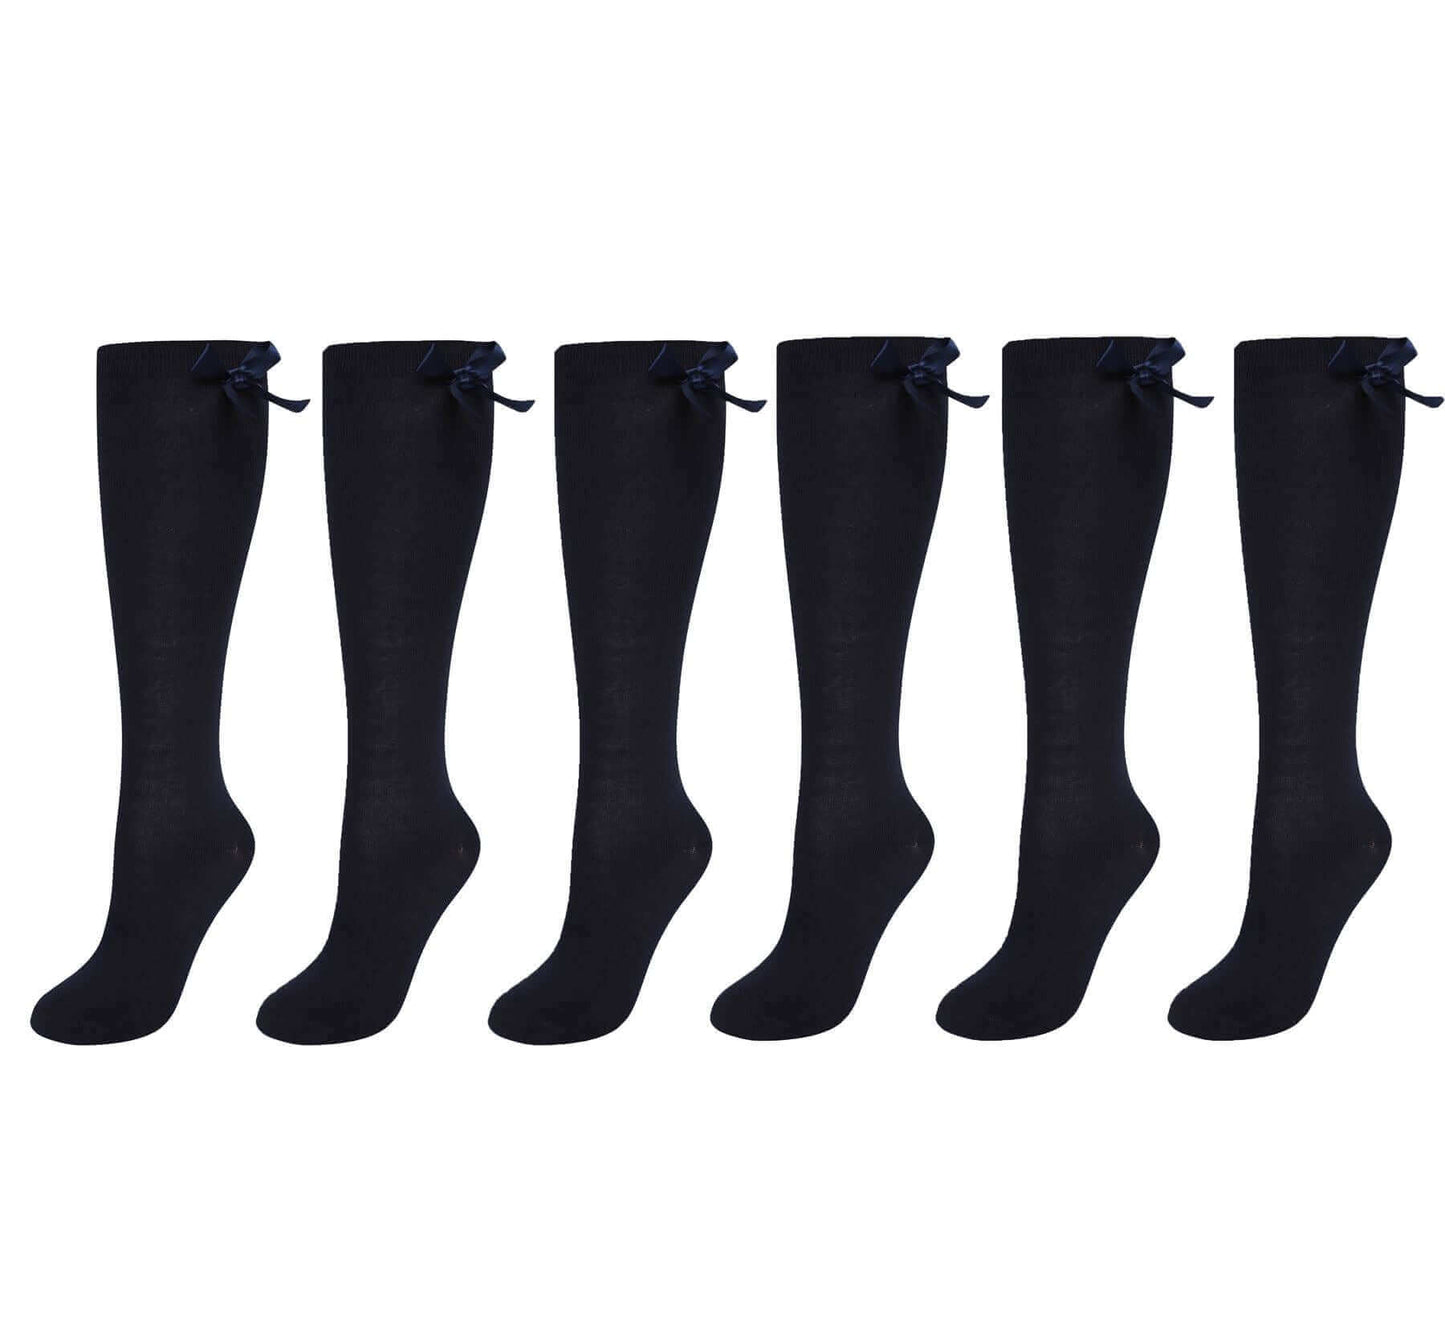 6 Pairs Of Girls Knee High Socks Long School Socks With Ribbons Bows. Buy now for £8.00. A Socks by Sock Stack. 12-3, 4-6, 6-8, 9-12, black, bow tie, childrens, cotton, girls, grey, kids, navy, ribbon, school, socks, white.